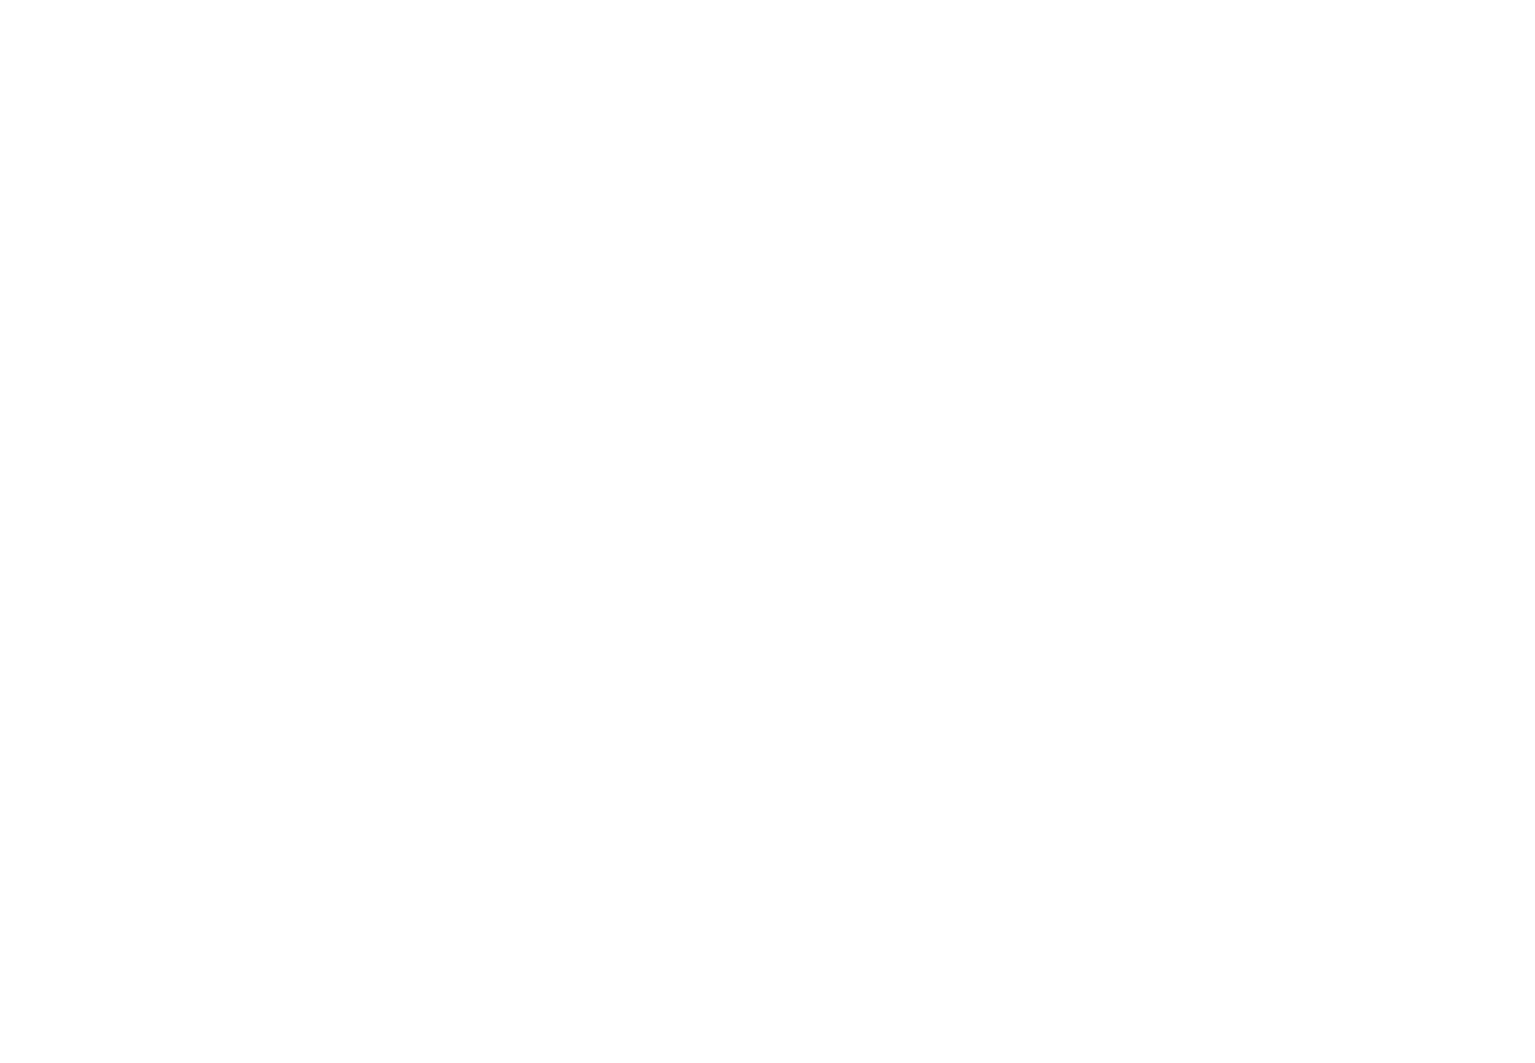 Mike M